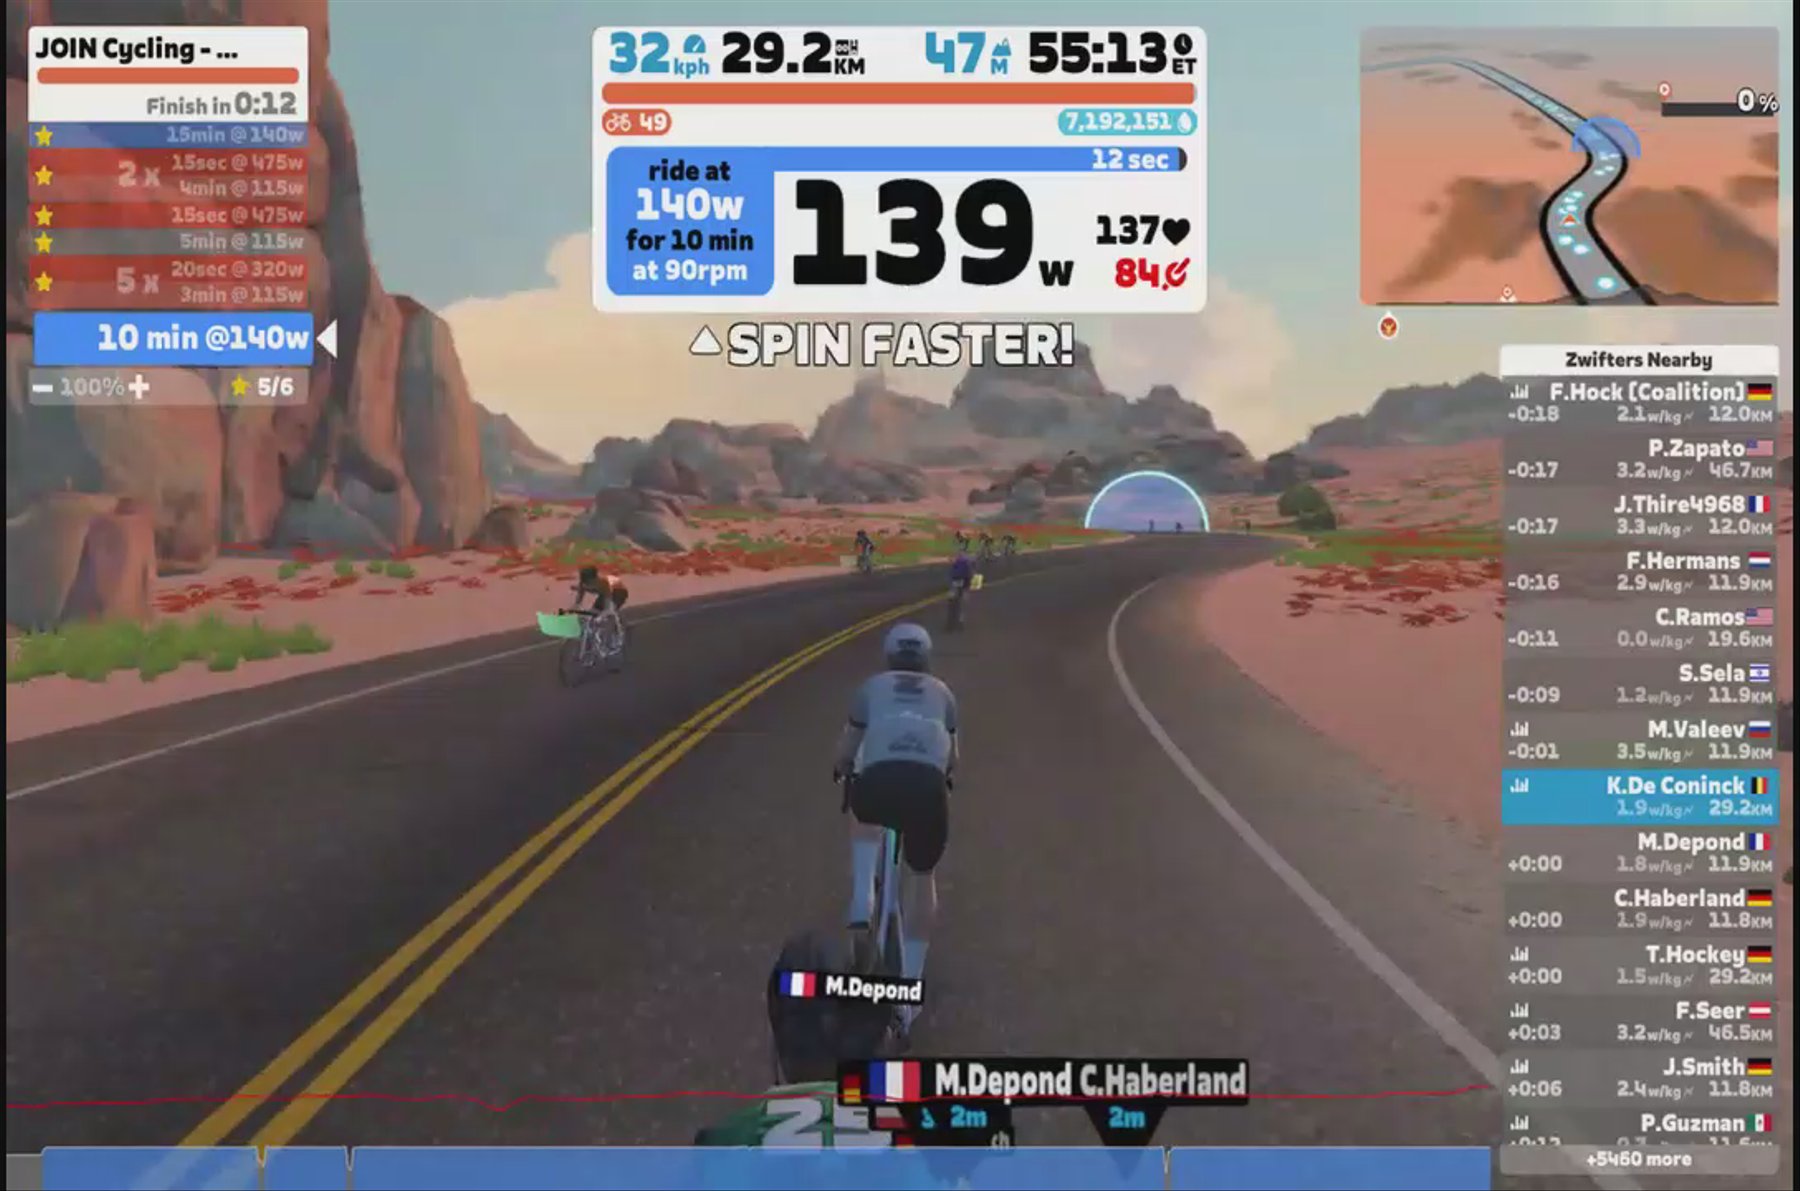 Zwift - JOIN Cycling - Sprints + maximale torque in Watopia